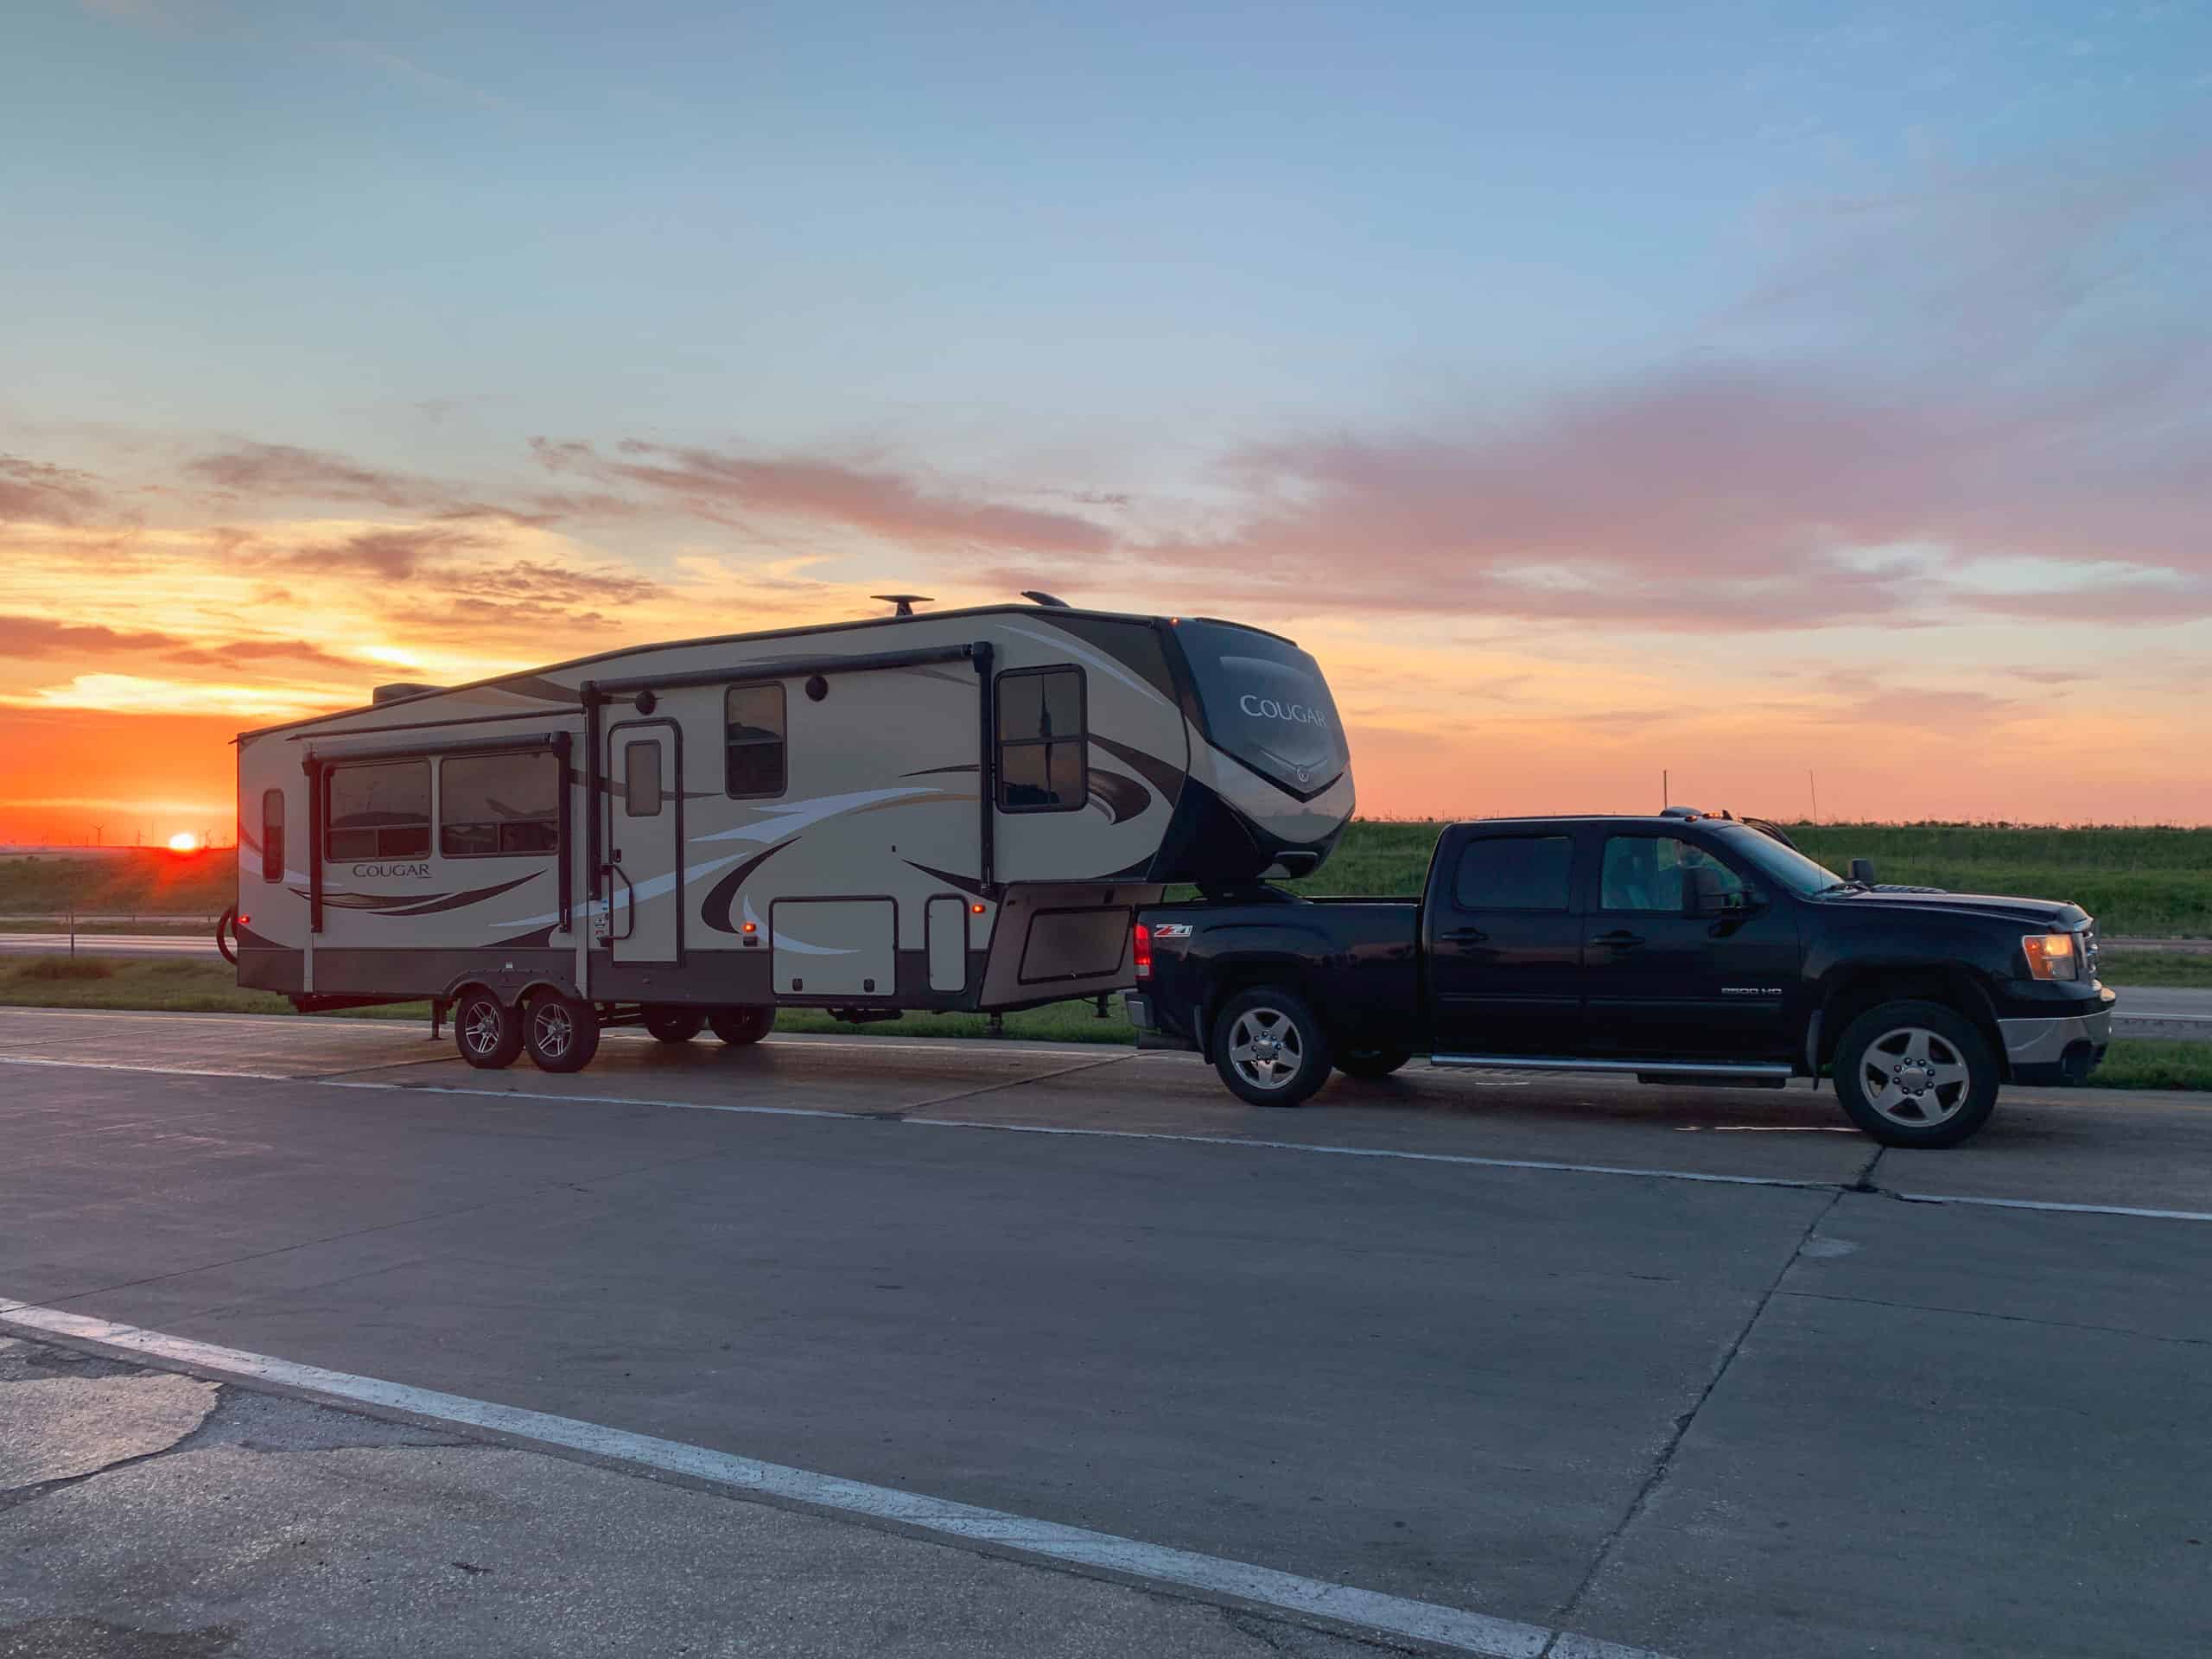 Our Fifth Wheel RV at sunset